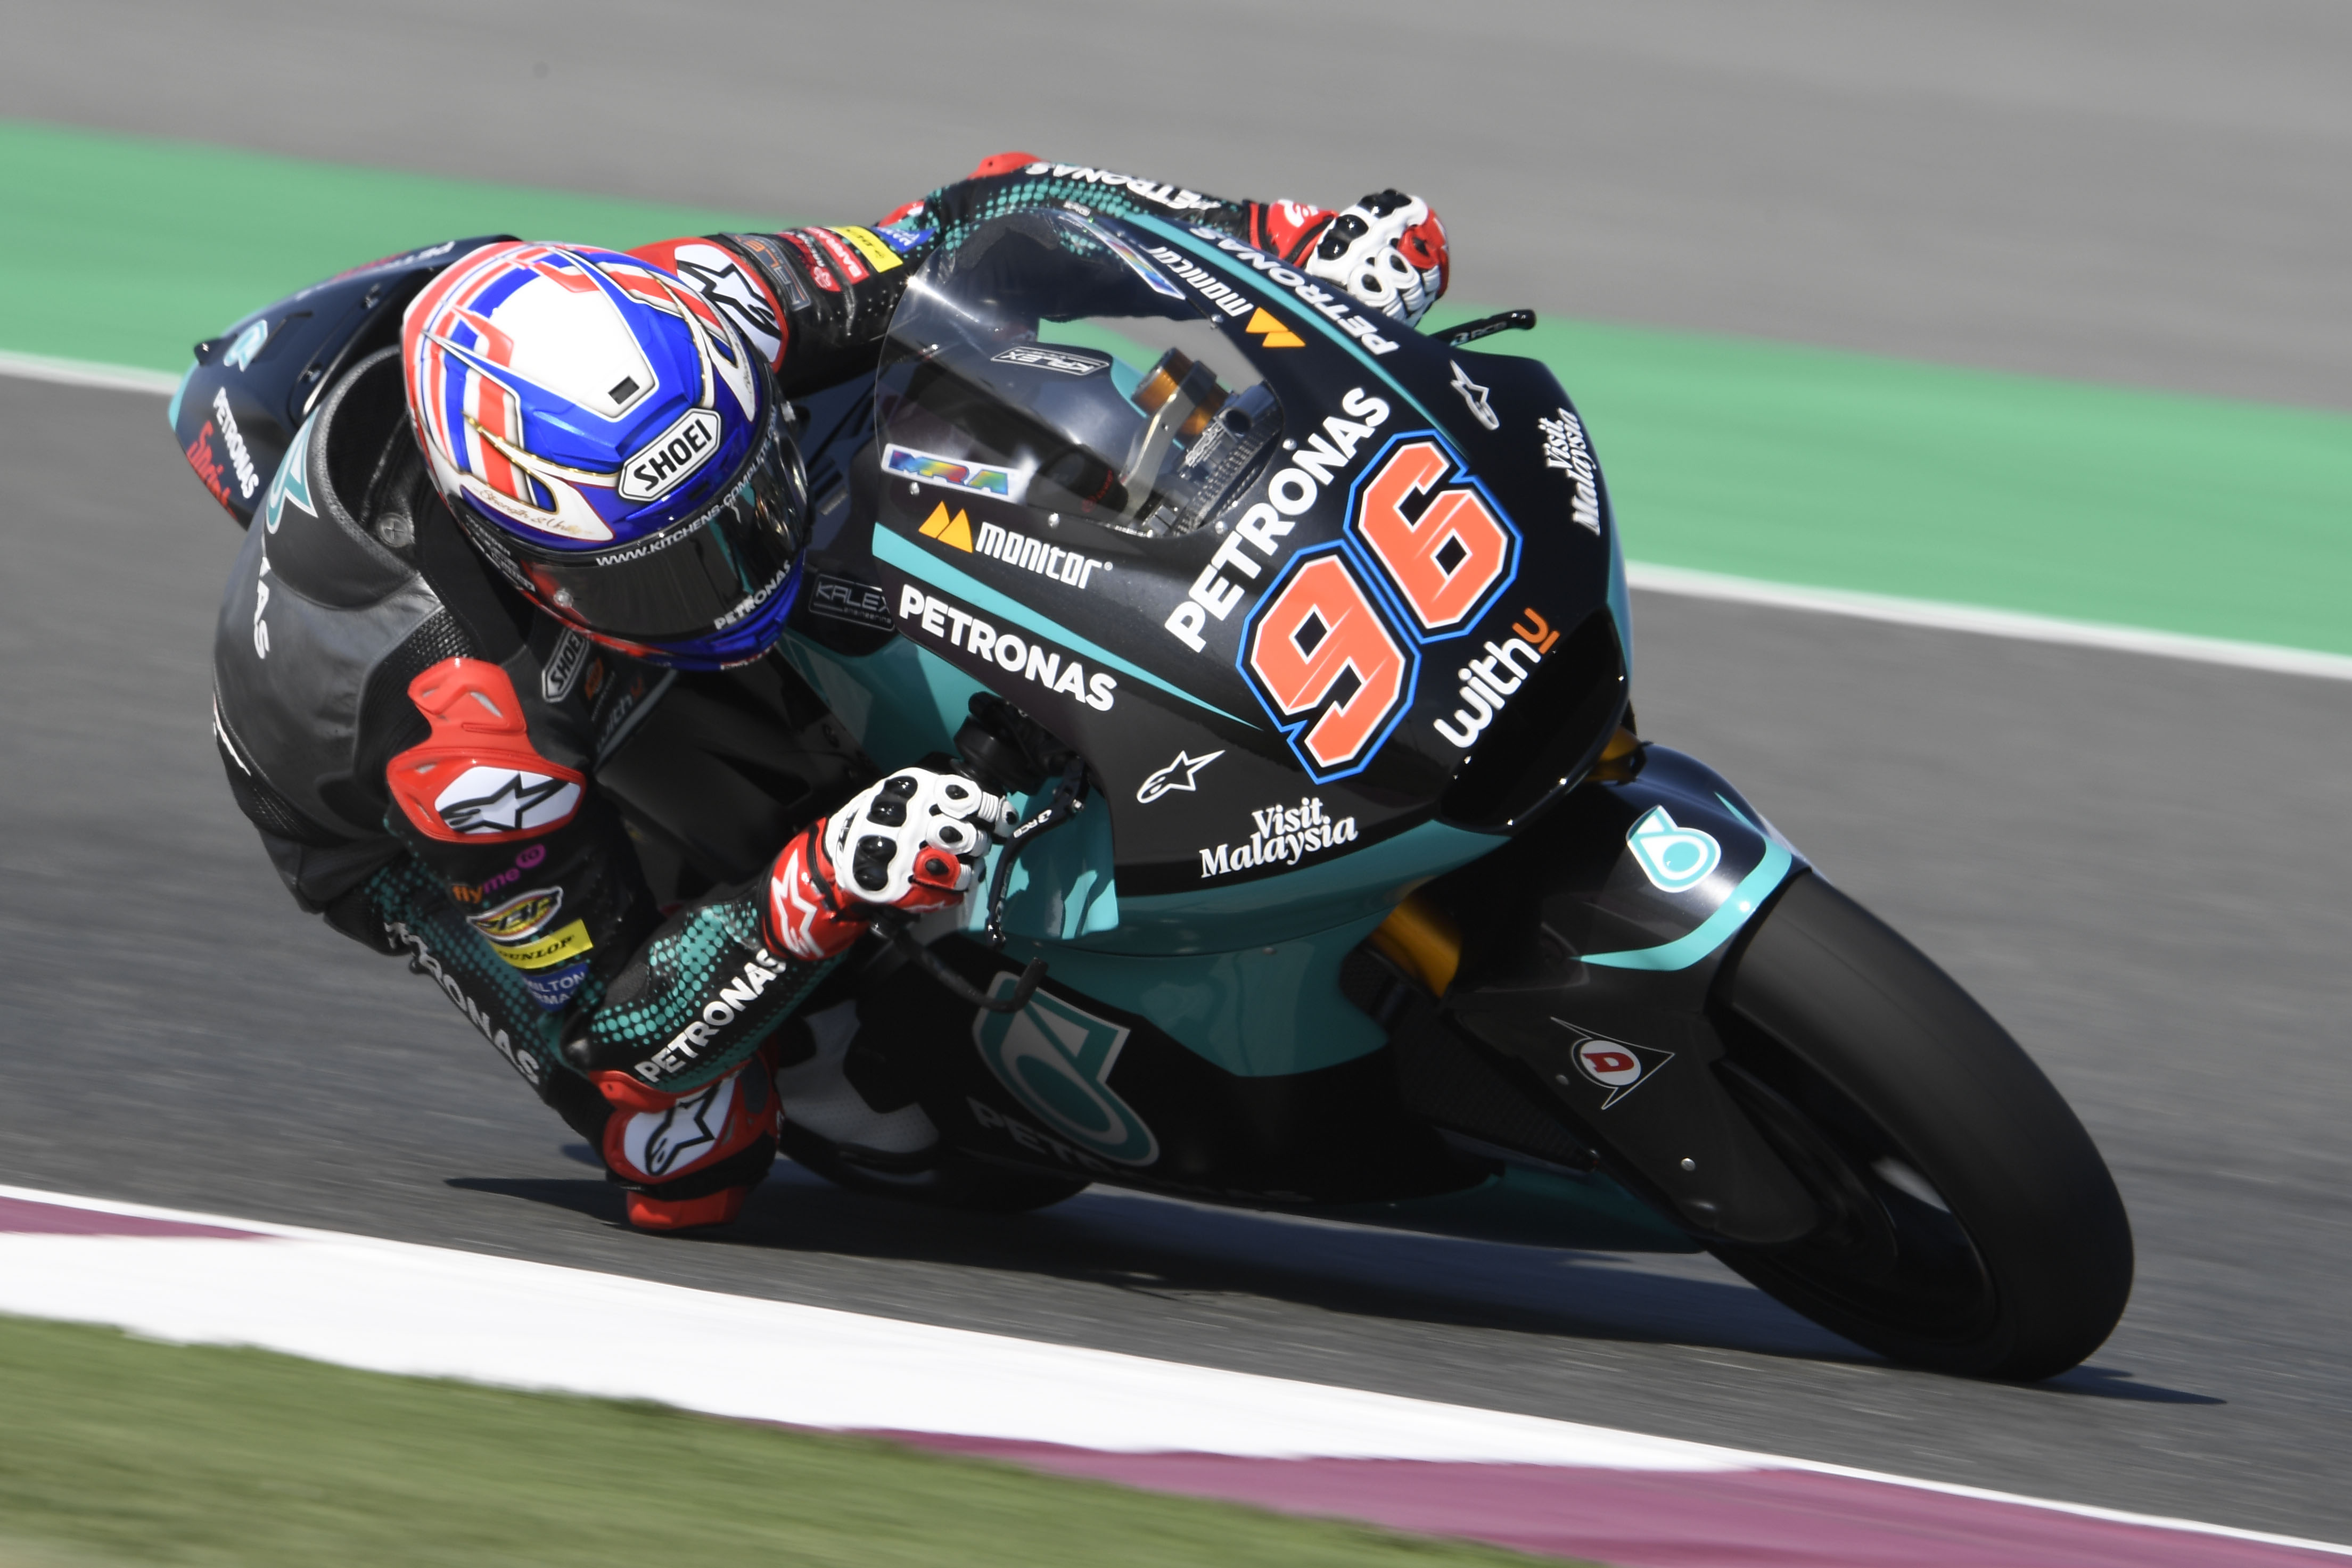 PETRONAS Sprinta Racing riders secure double points finish in Qatar